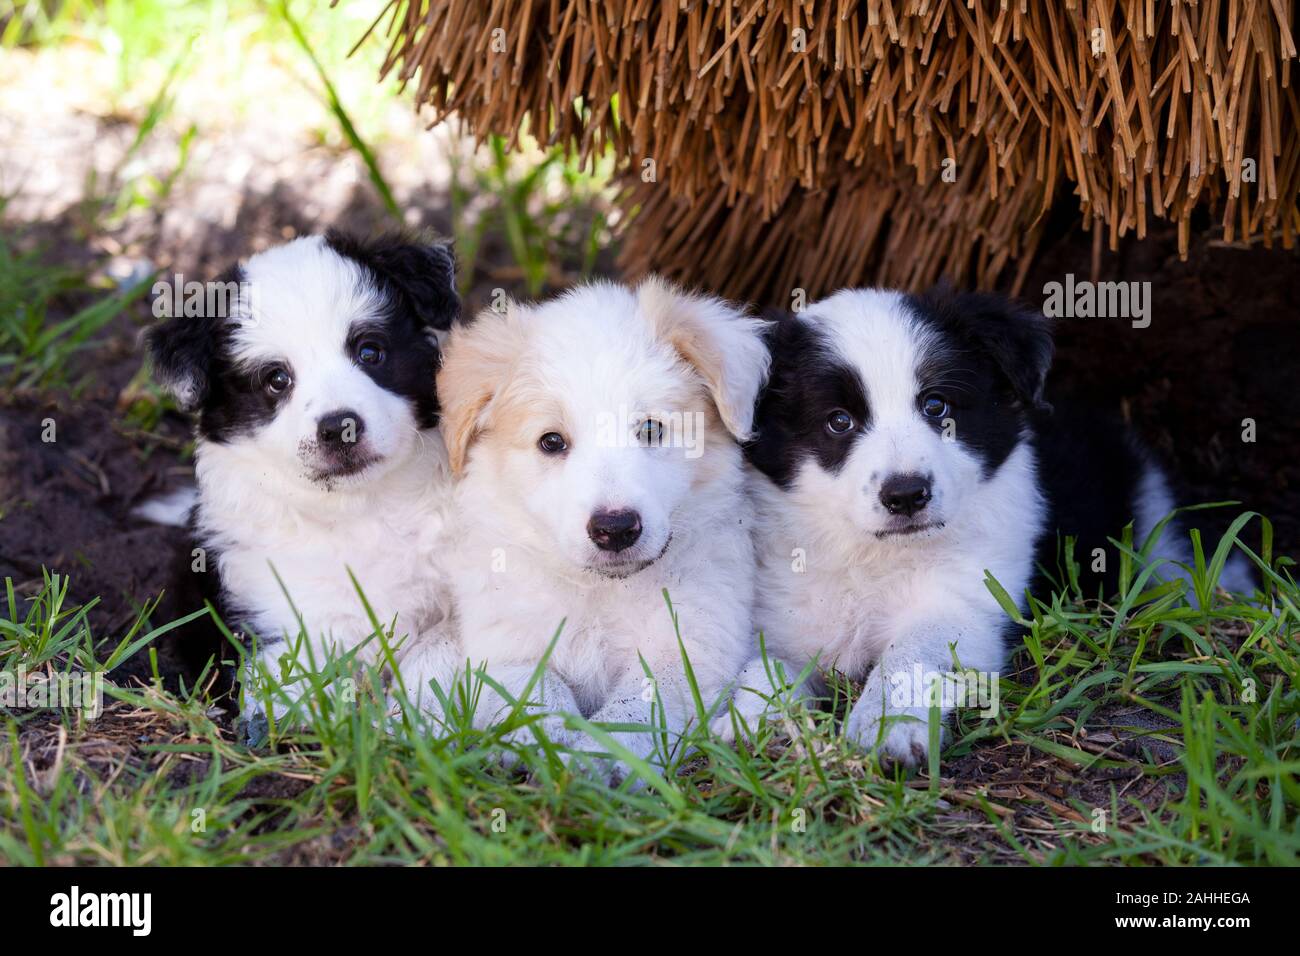 Three Border Collie puppies, two black and white and one red and white, looking cute in the grass. Stock Photo